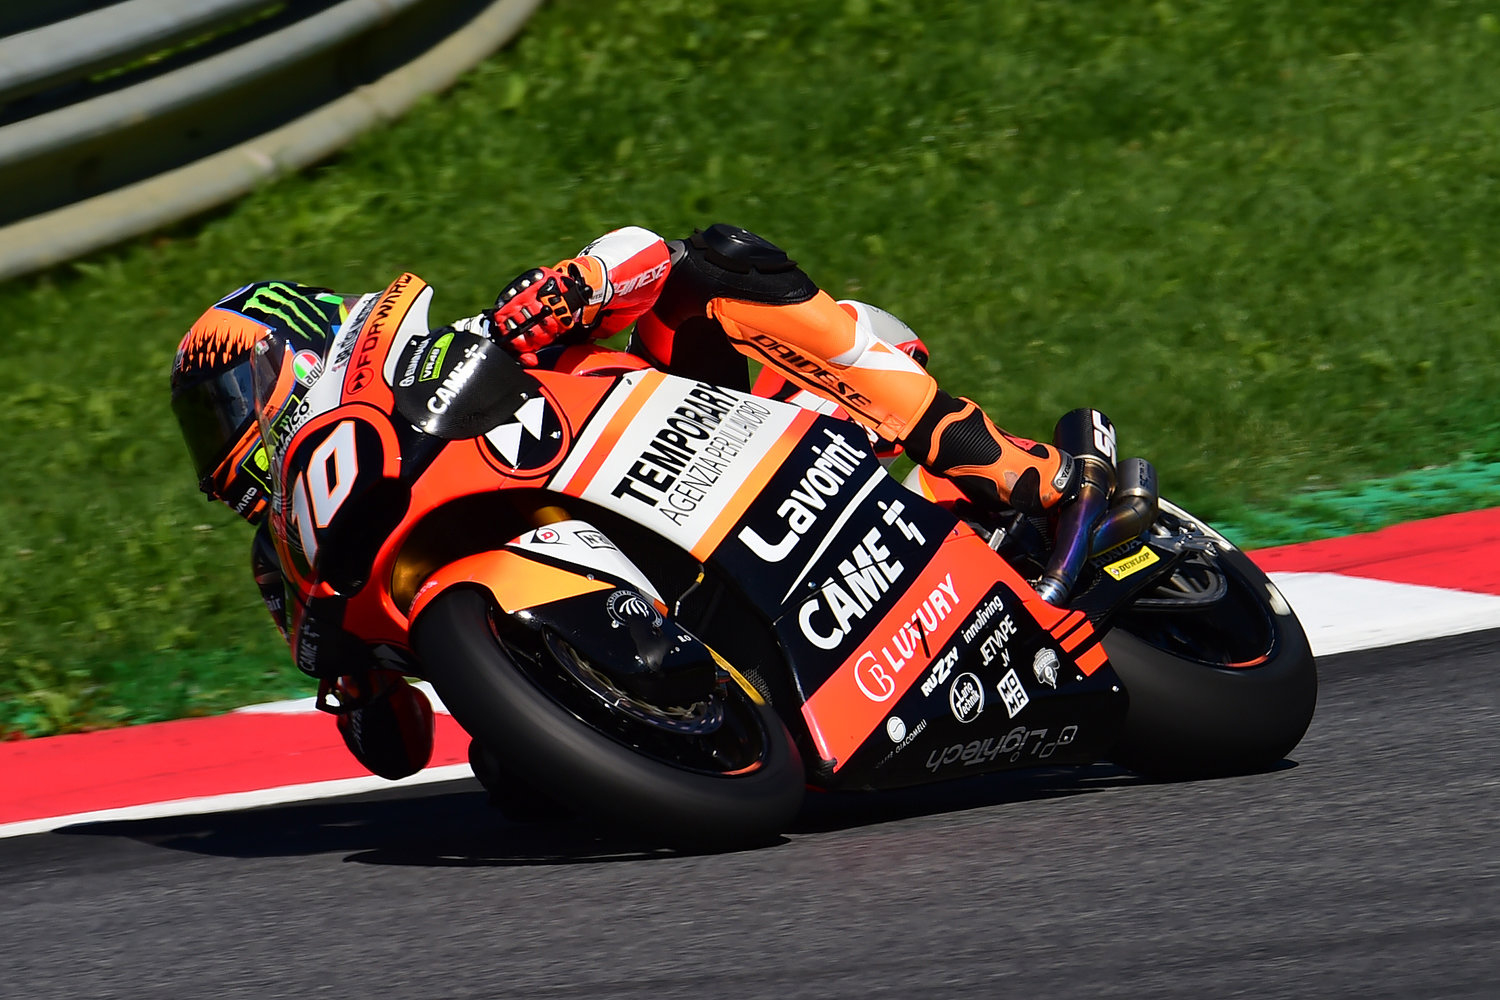 Forward Racing Team completes positive day of testing in Austria